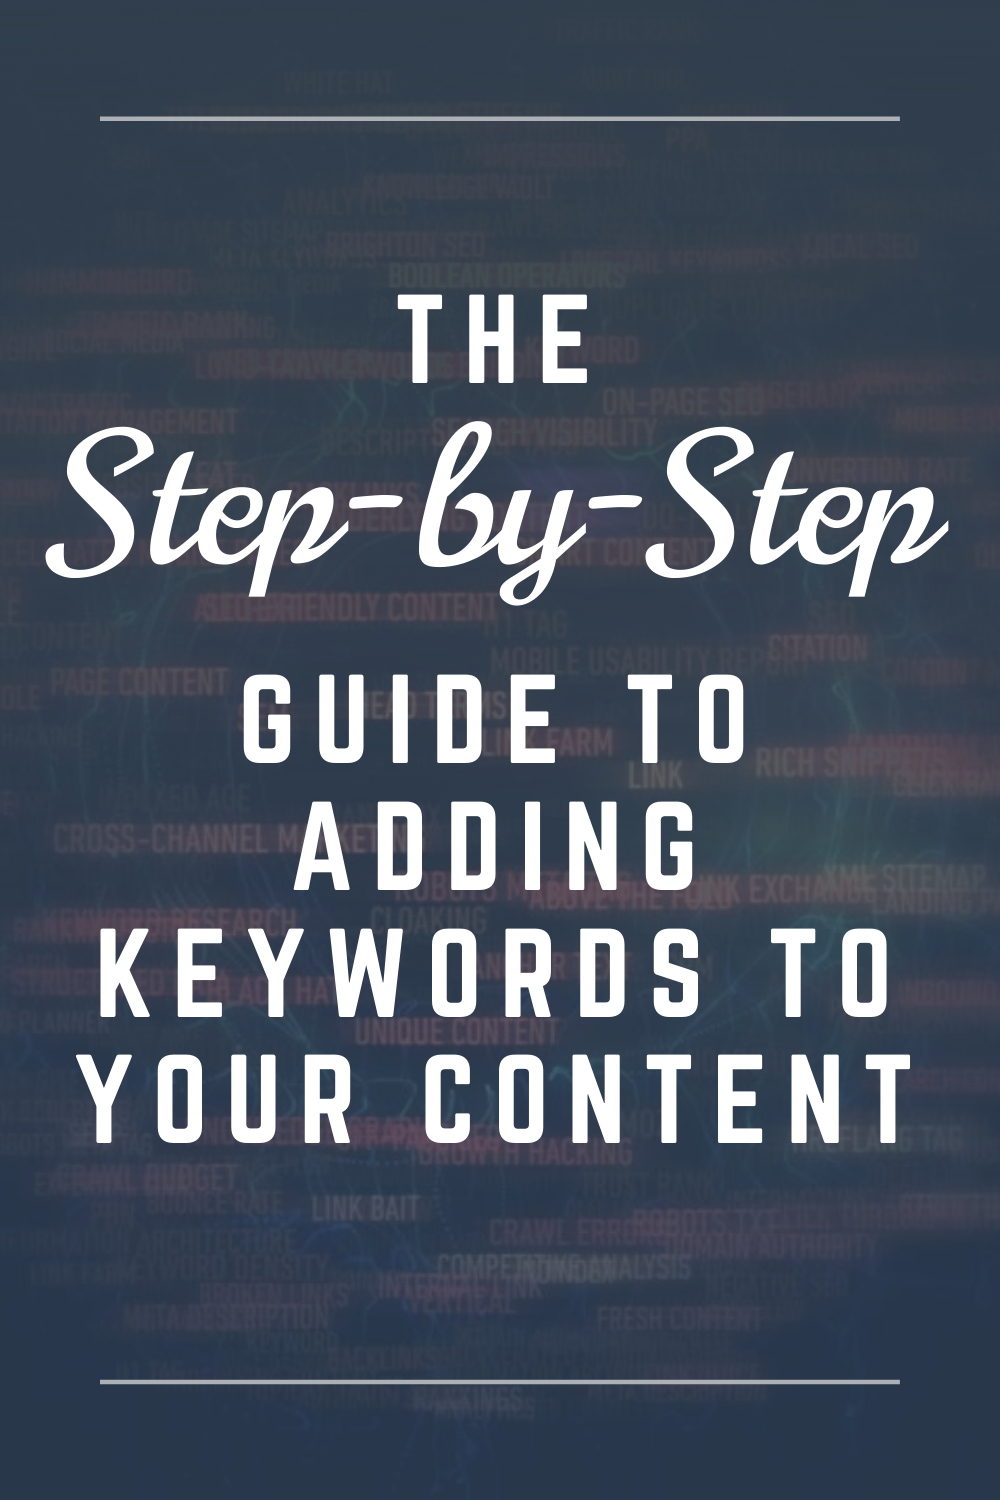 The step-by-step guide to adding keywords to your content by WebWiskee